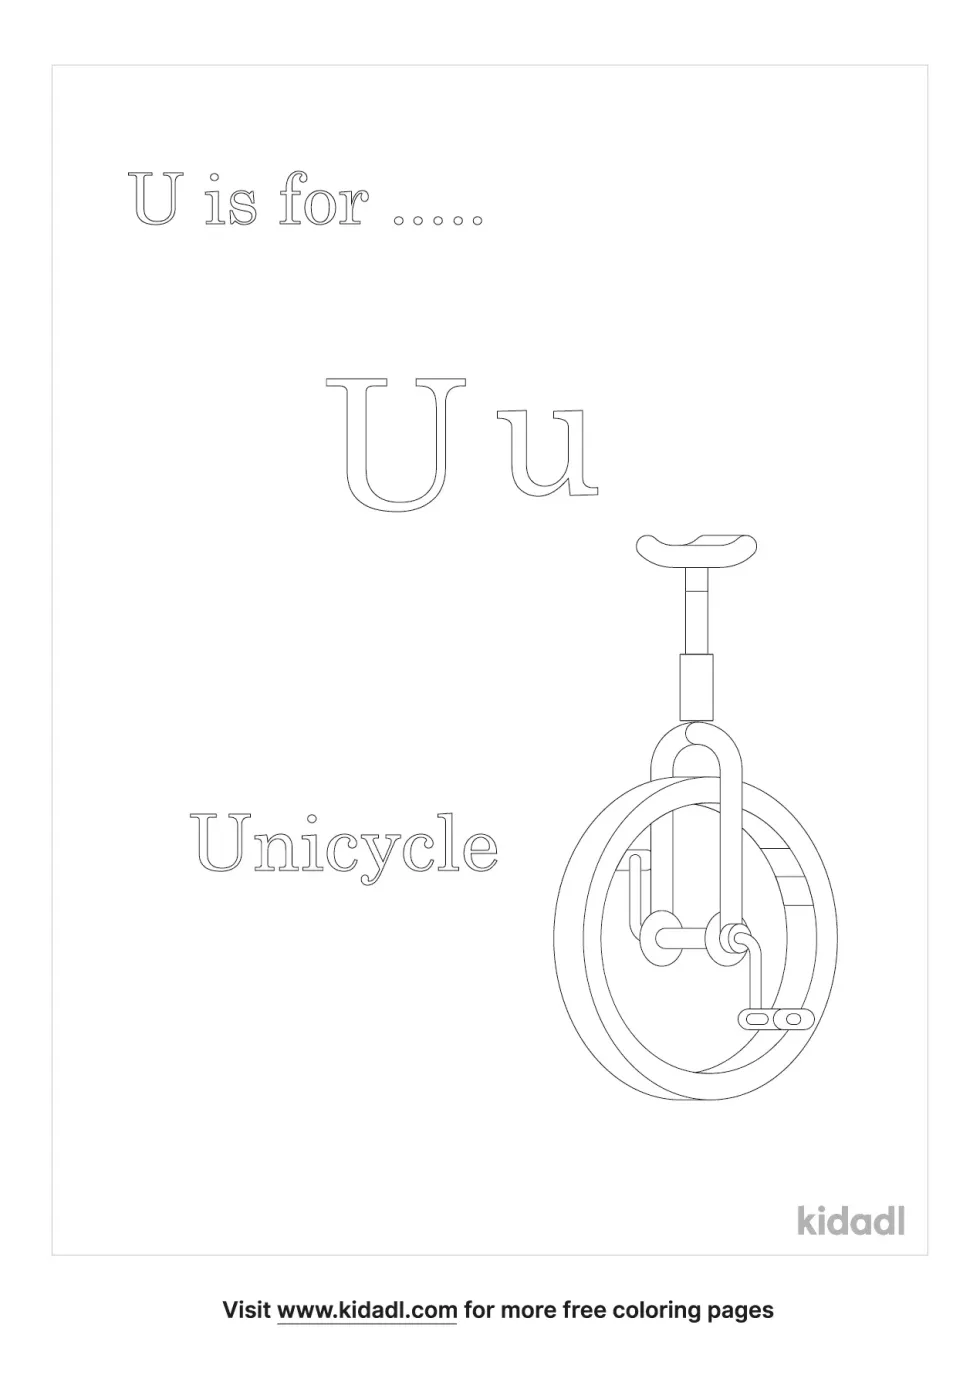 U Is For Unicycle Coloring Page